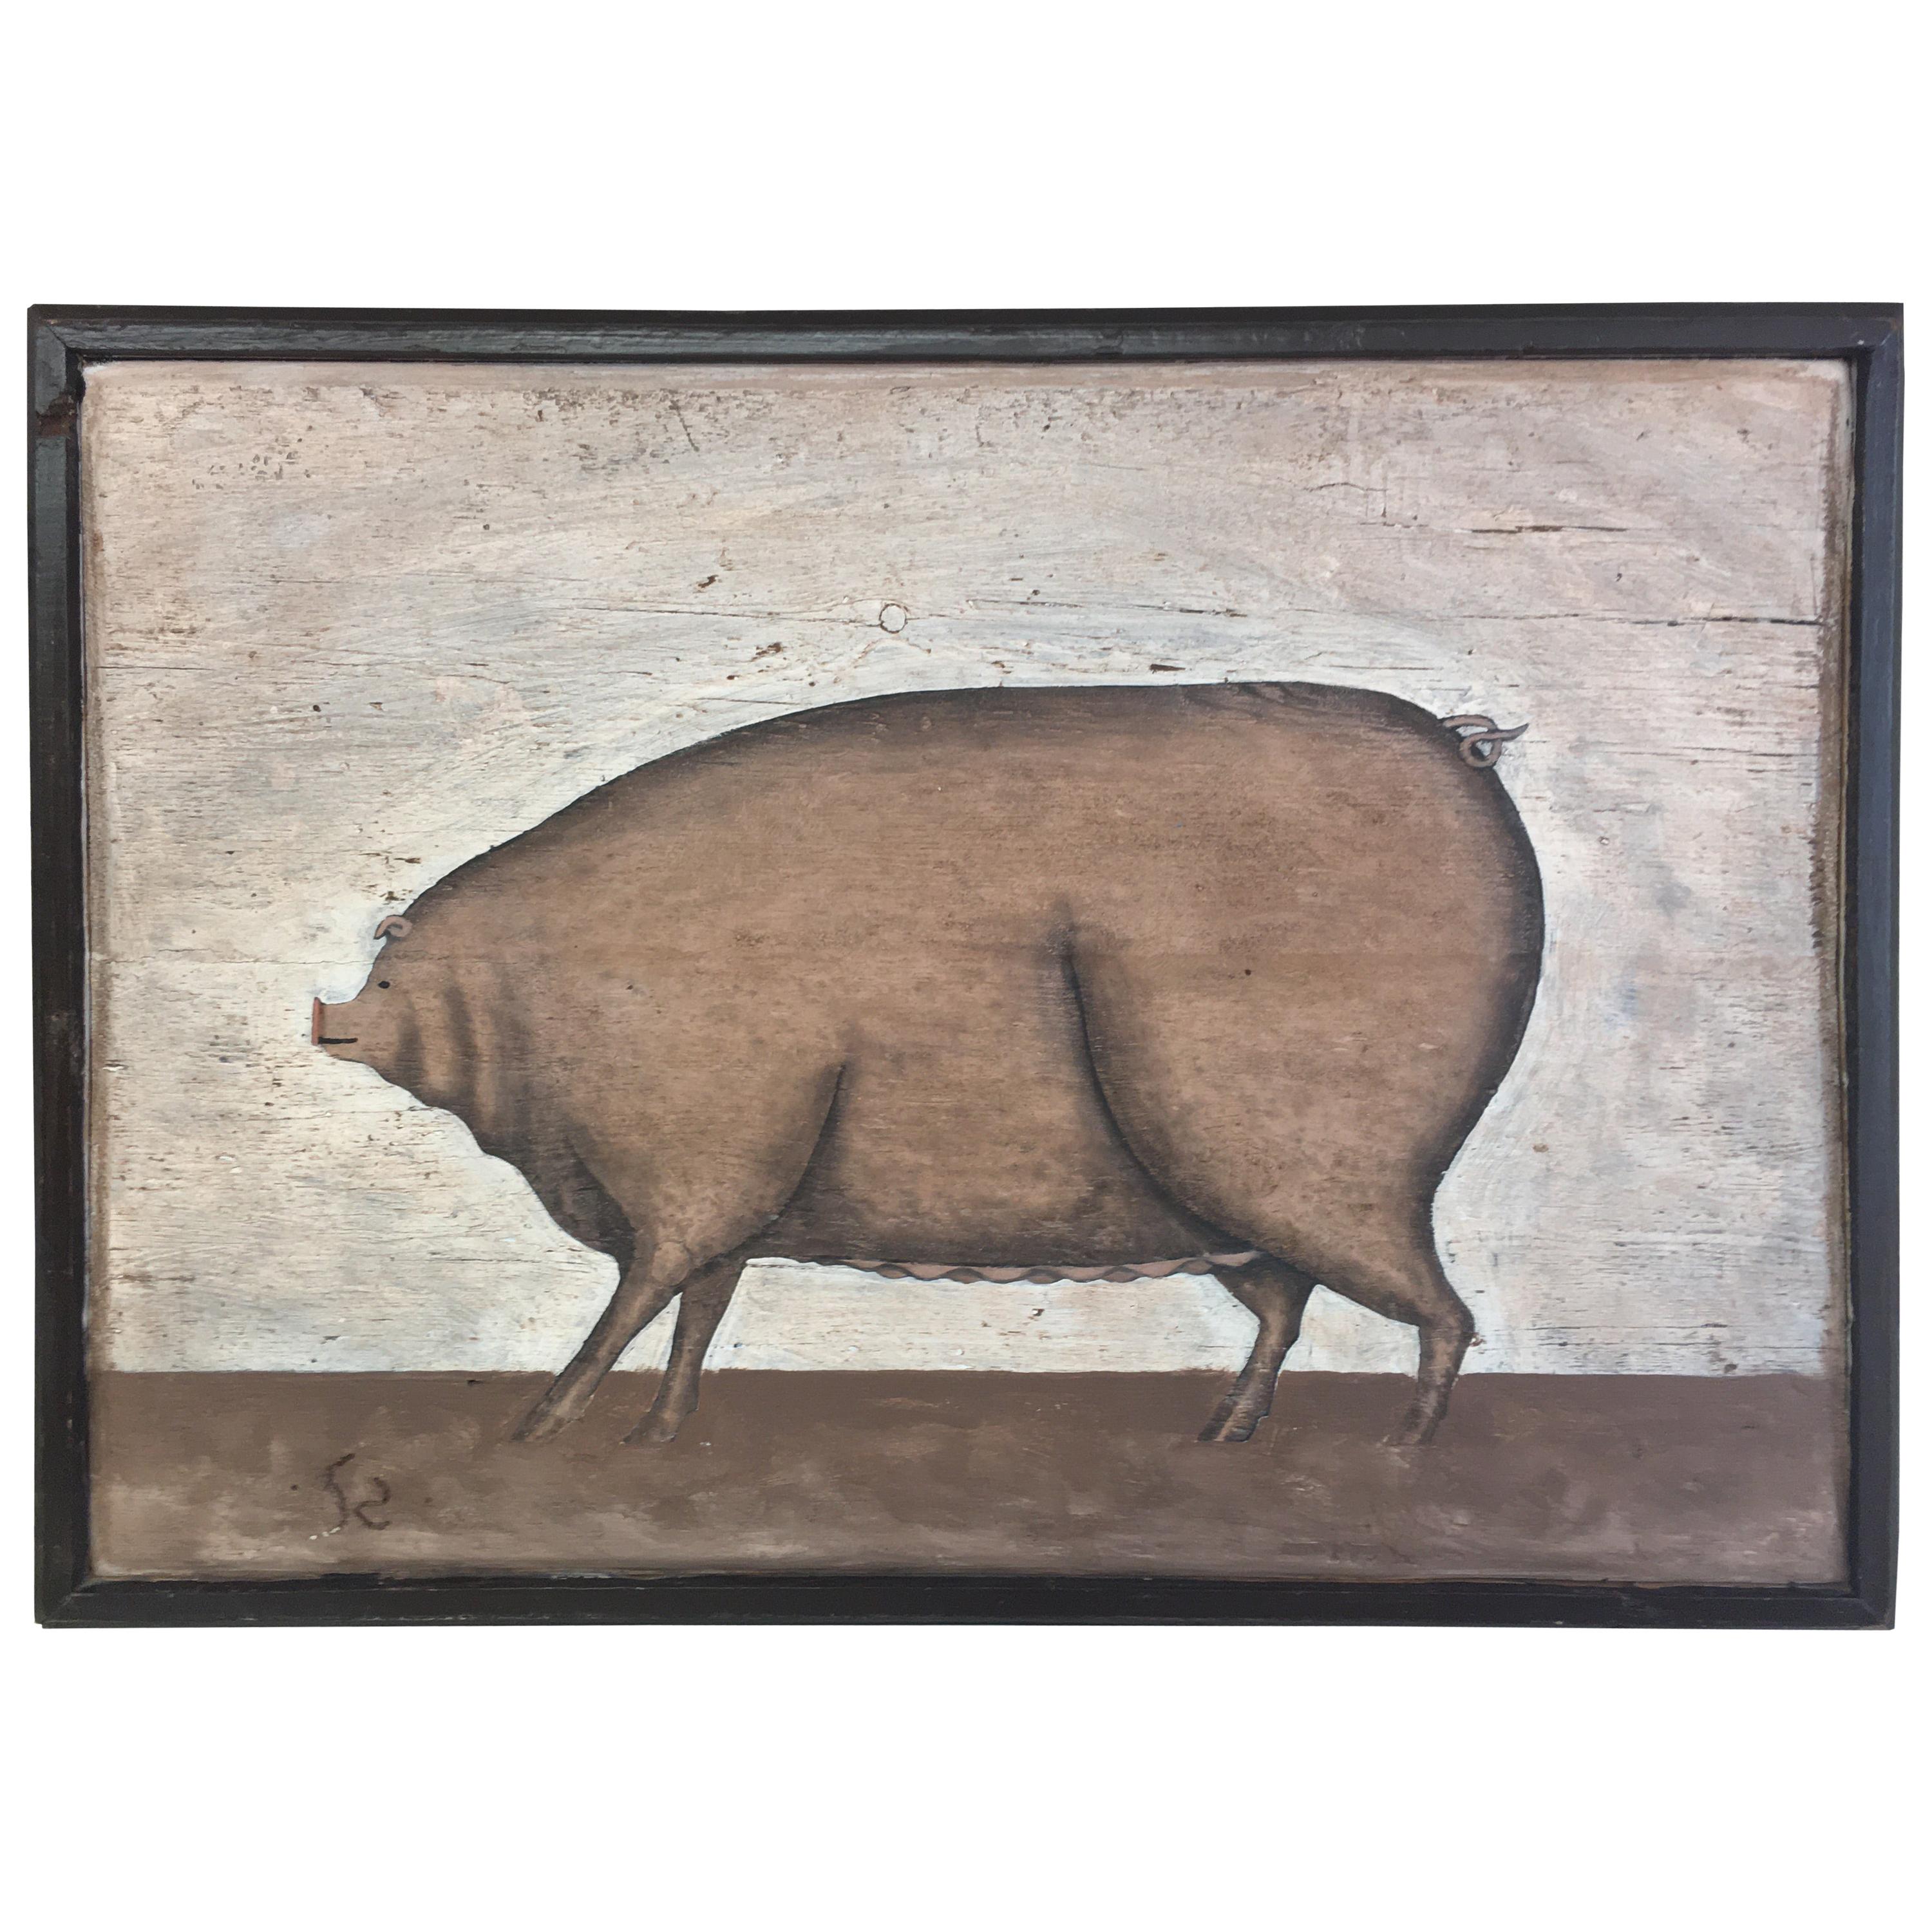 Canadian Folk Art Painting of a Pig, by Maurice Dupras